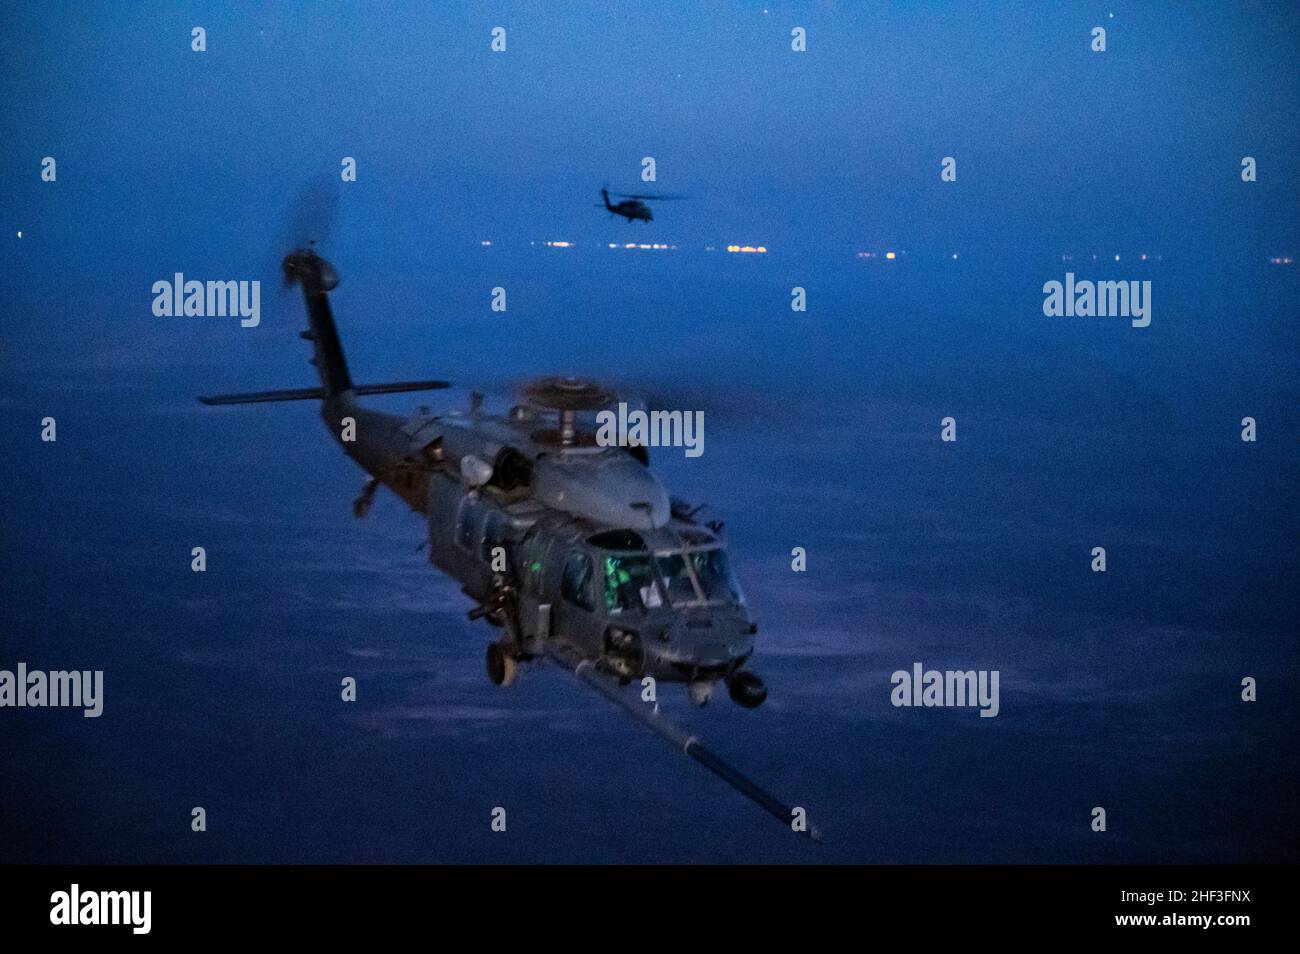 A U.S. Air Force HH-60 Pave Hawk assigned to the 46th Expeditionary Rescue Squadron receives fuel from a U.S. Air Force HC-130J Combat King II assigned to the 26th ERQS during a helicopter air-to-air refueling operation over the U.S. Central Commands area of responsibility, Jan. 3, 2021. The HH-60G Pave Hawk helicopter delivers U.S. Central Command the ability to conduct day or night personnel recovery operations into hostile environments to recover isolated U.S., partner nation, and foreign-national forces. (U.S. Air Force photo by Senior Airman Daniel Hernandez) Stock Photo